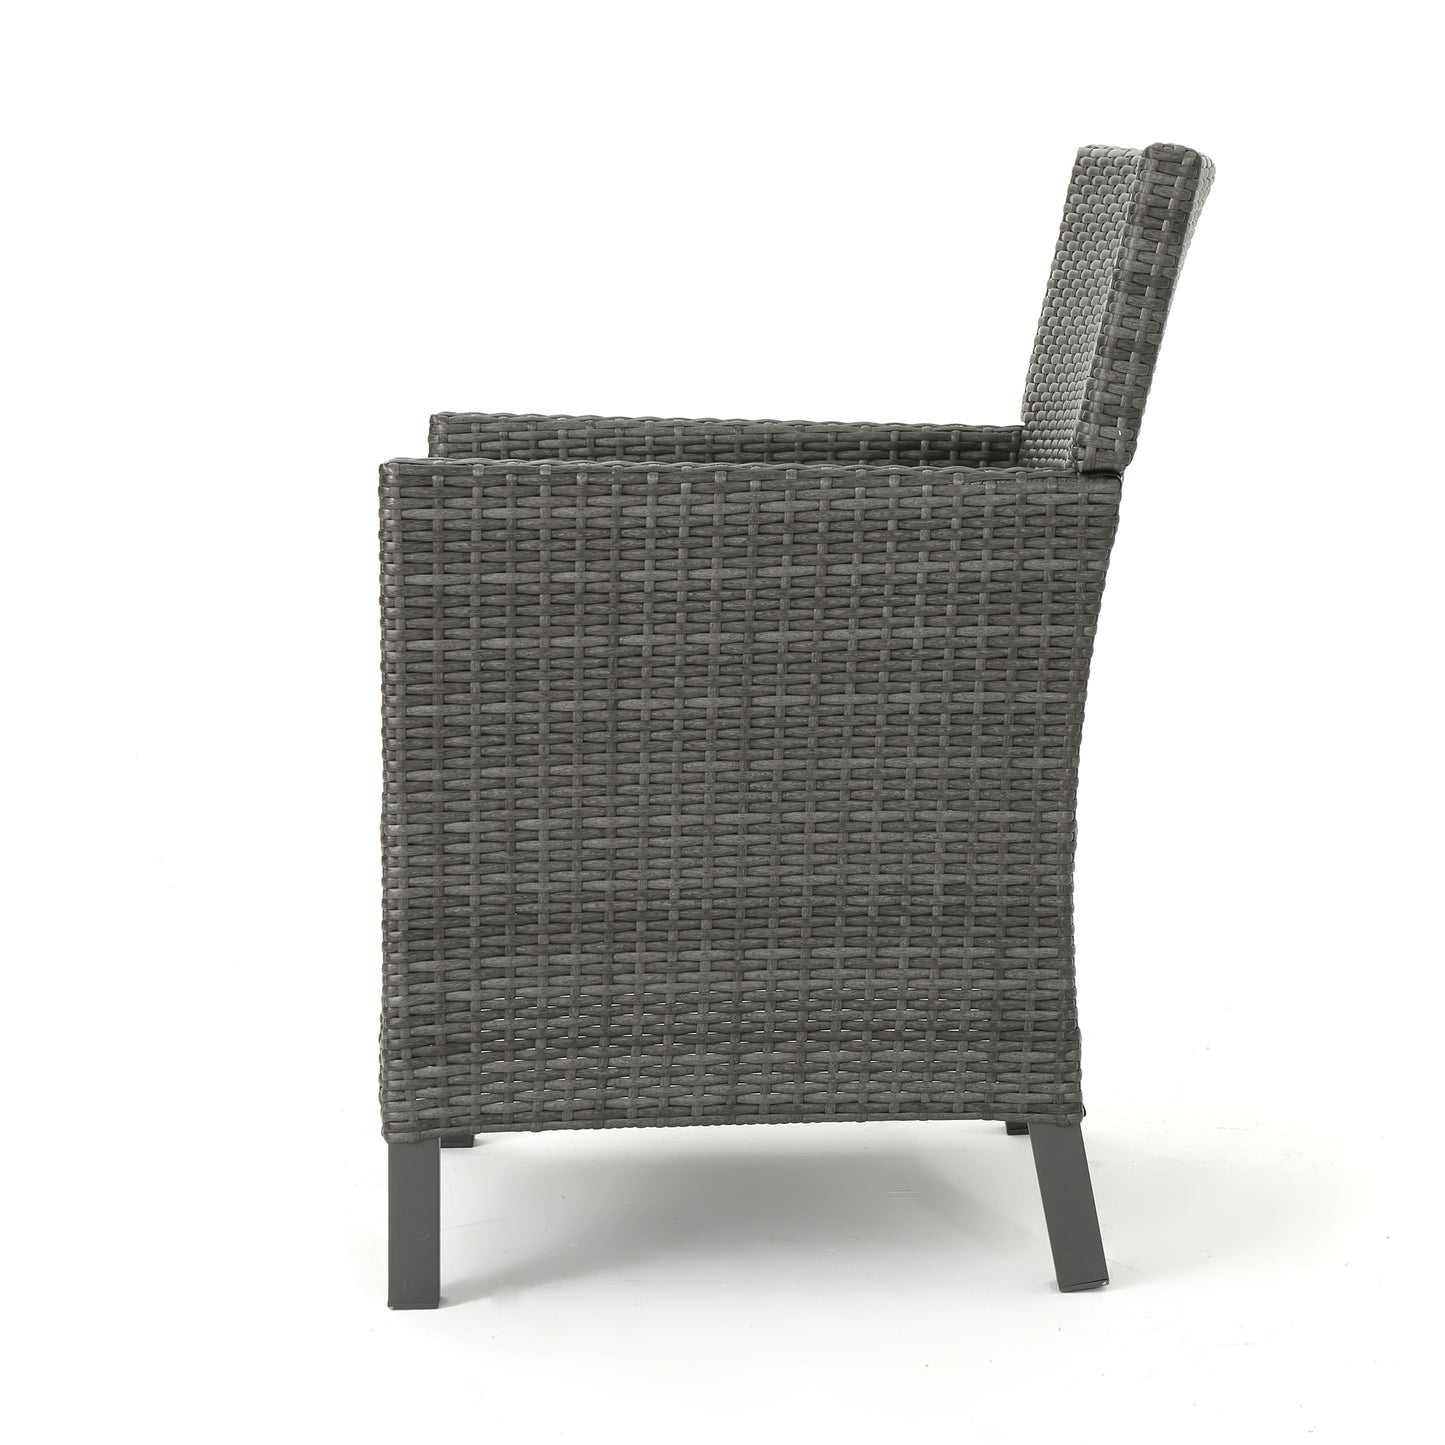 Cyrus Outdoor Wicker Dining Chairs with Water Resistant Cushions (Set of 2)